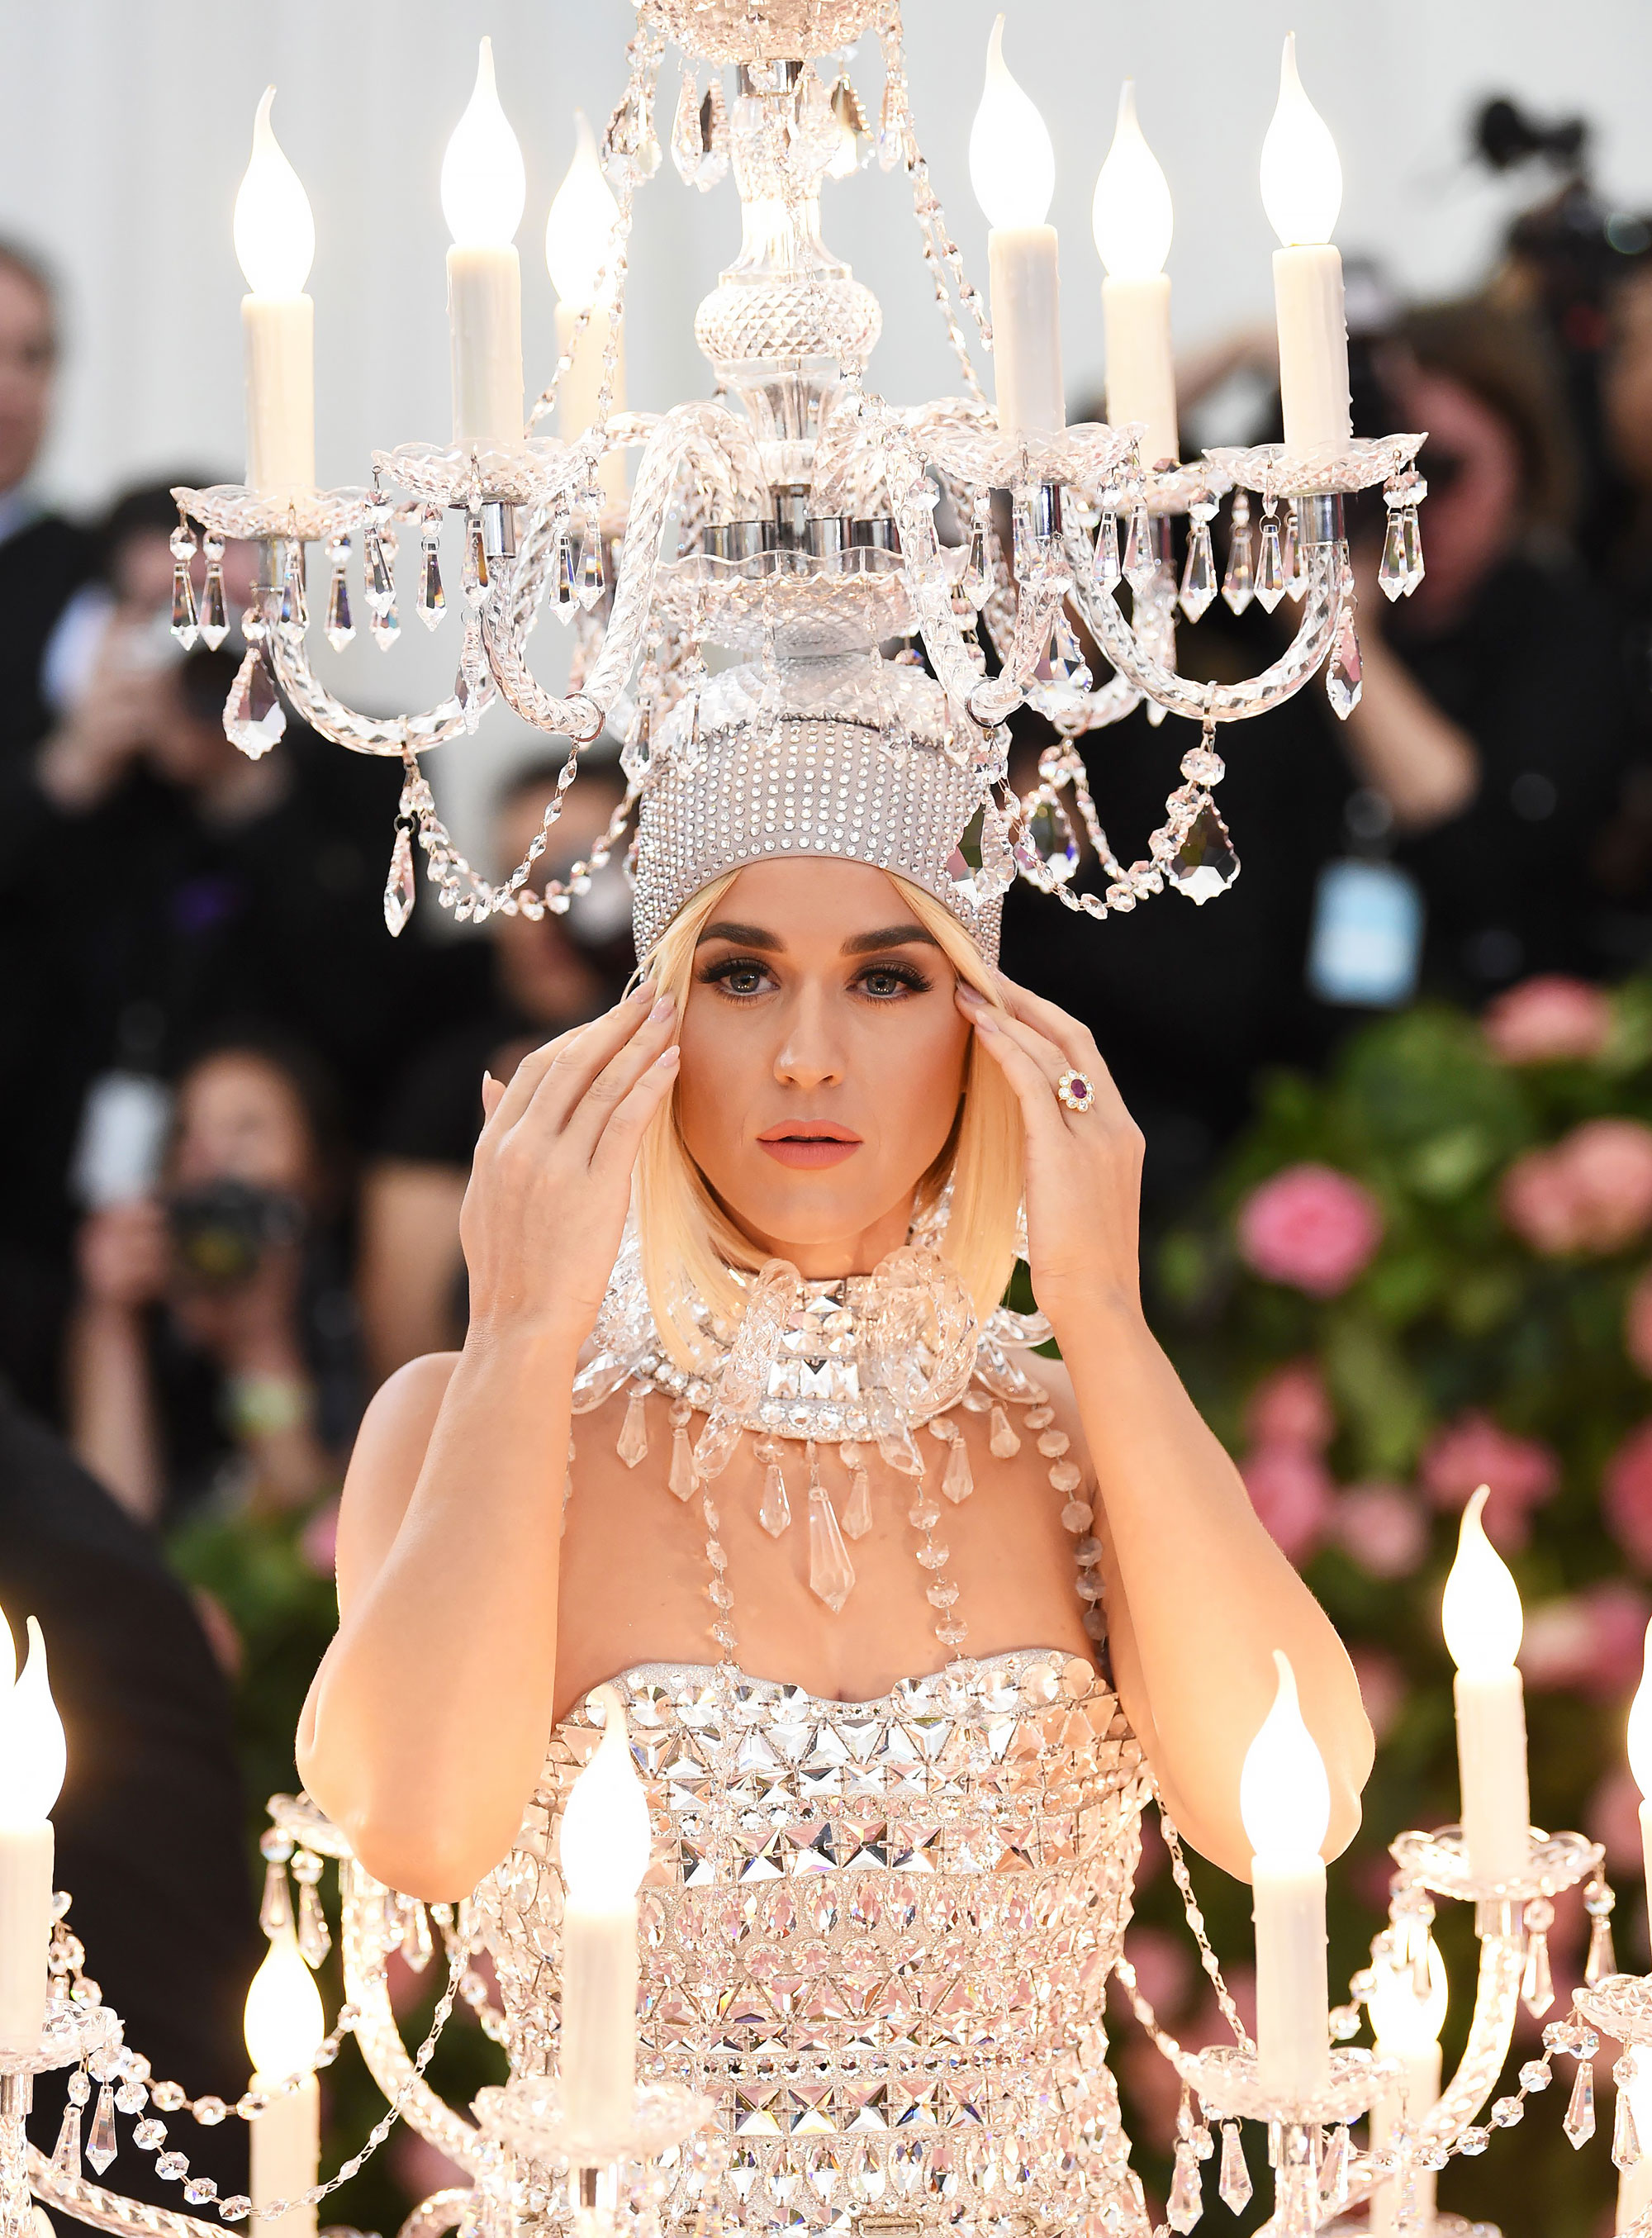 Chandelier Hats! Smurfette Dresses! Katy Weekly Perry\'s Style the Craziest Years Moments Us | Through